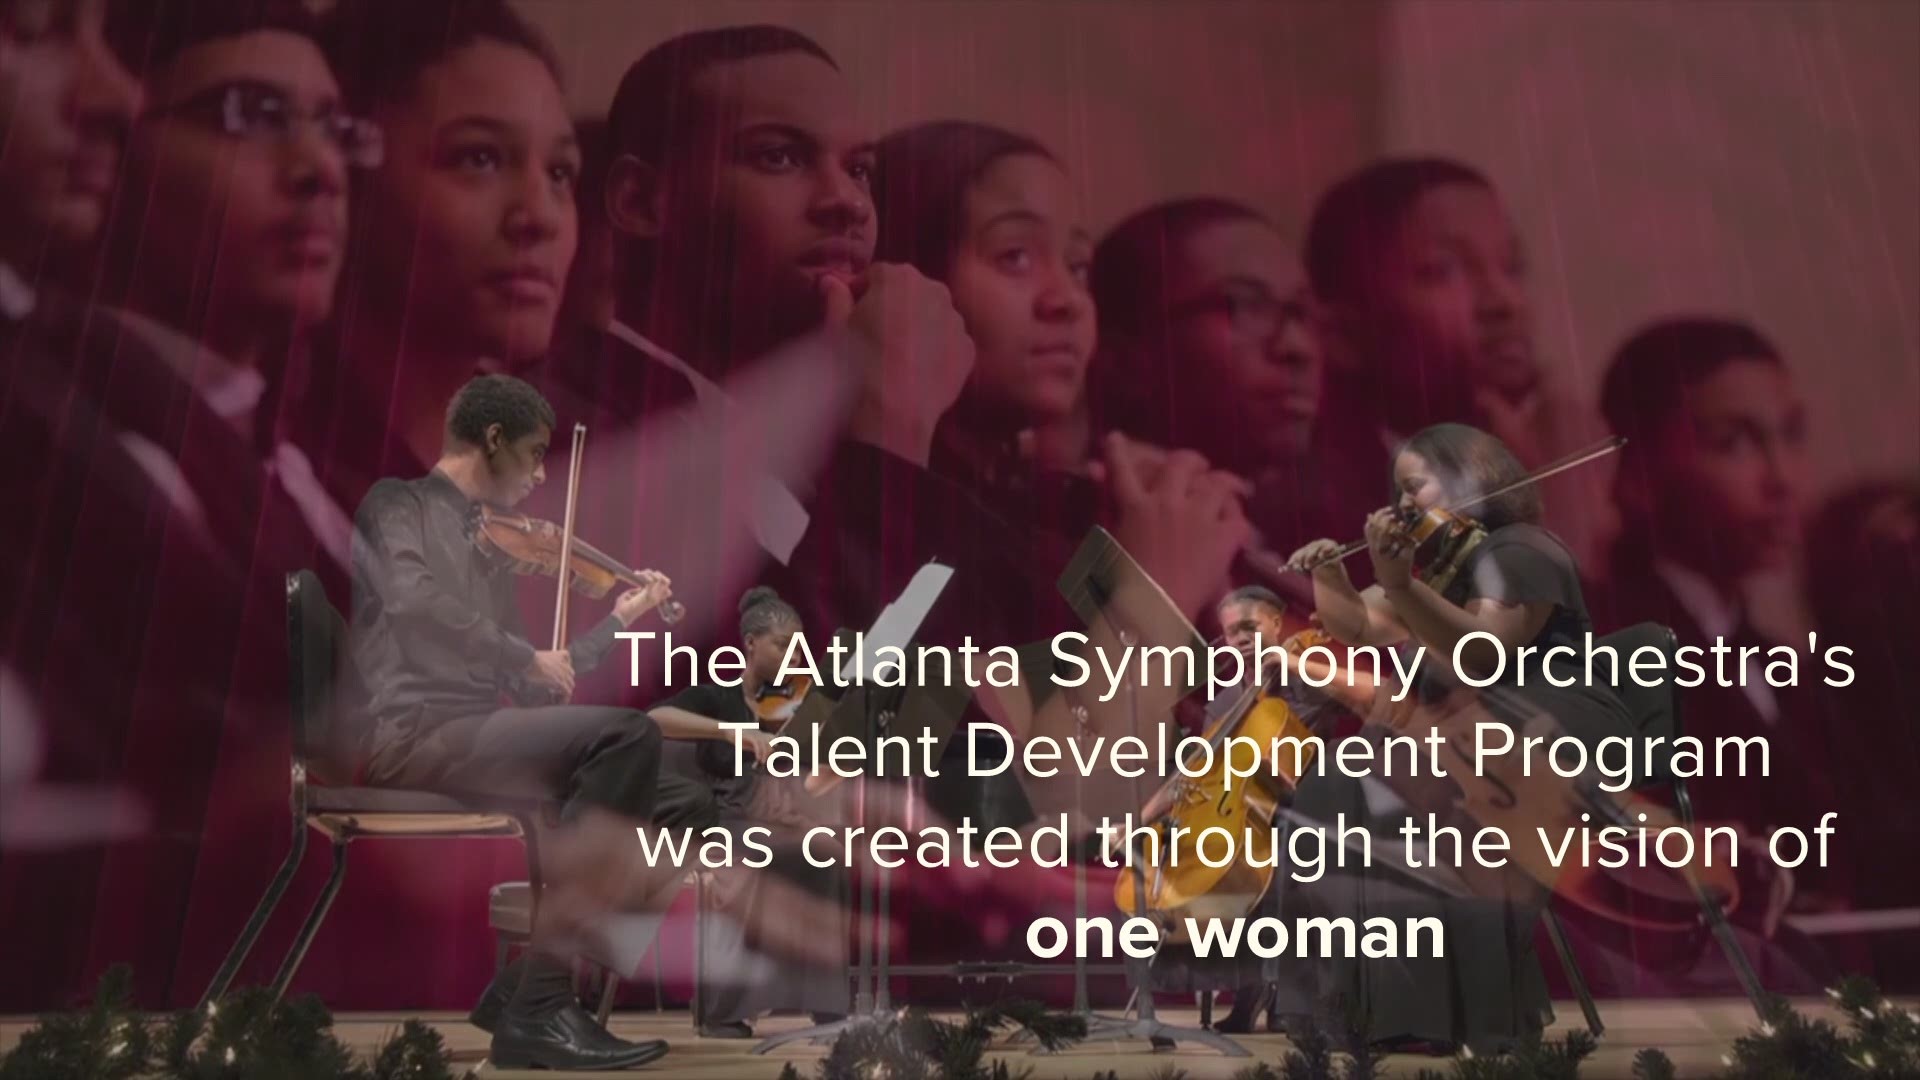 Here's a look at two musicians who are product of the Atlanta Symphony Orchestra's Talent Development Program and they are ready to change the world.